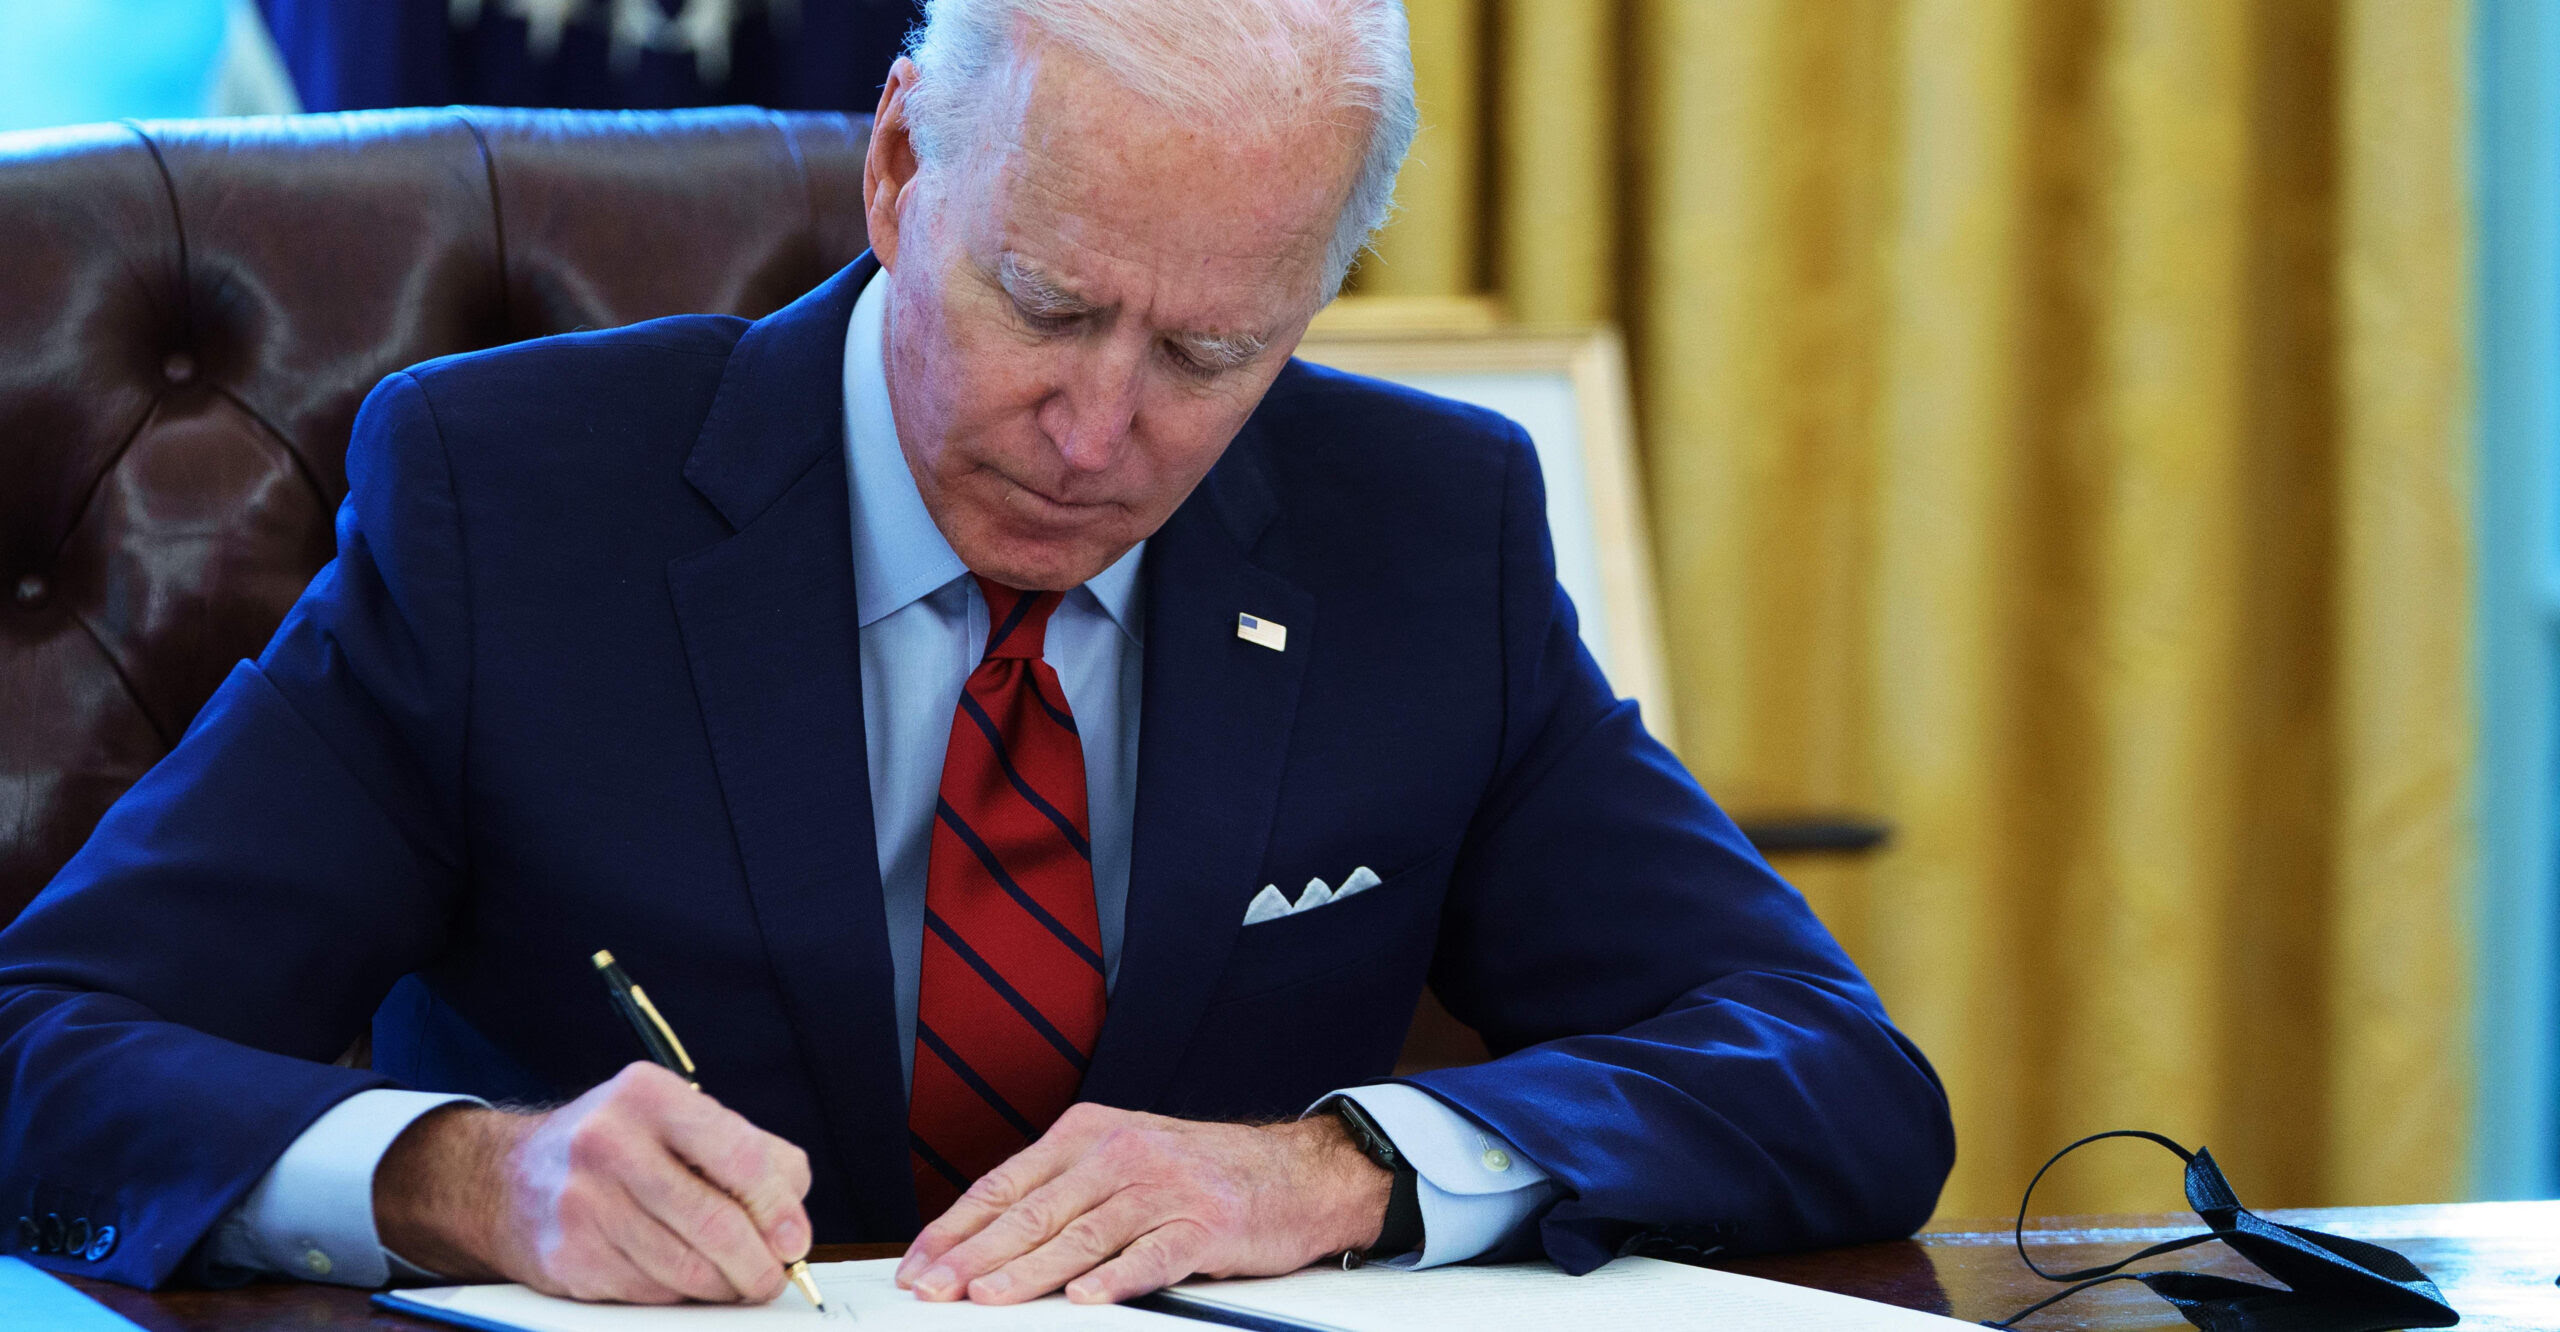 Biden’s Taxpayer Funding for Abortion Far Outspends Obama